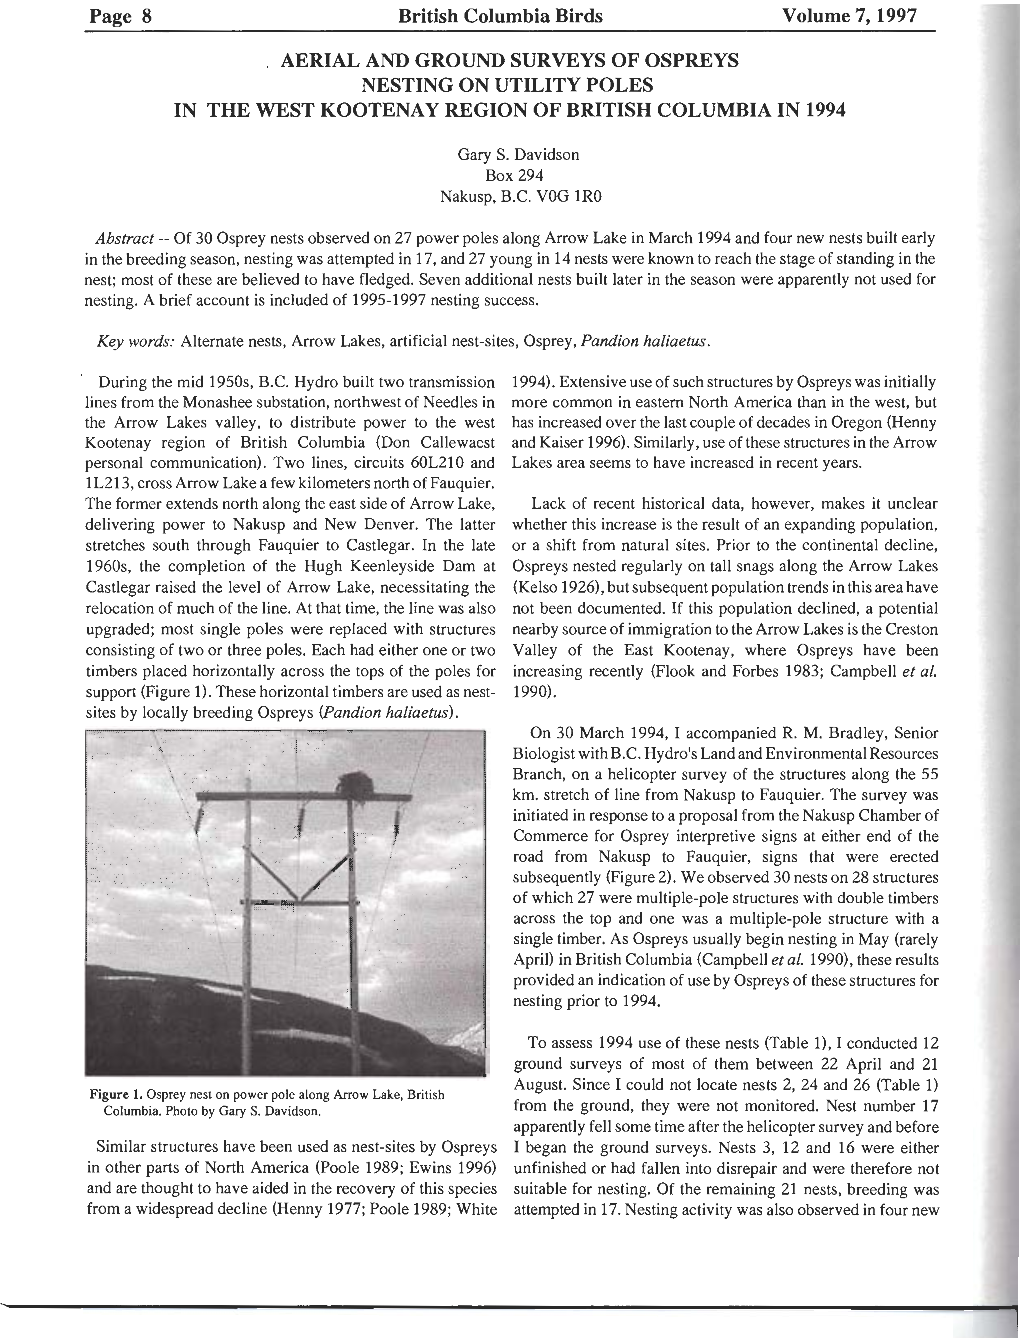 Aerial and Ground Surveys of Ospreys Nesting on Utility Poles in the West Kootenay Region of British Columbia in 1994